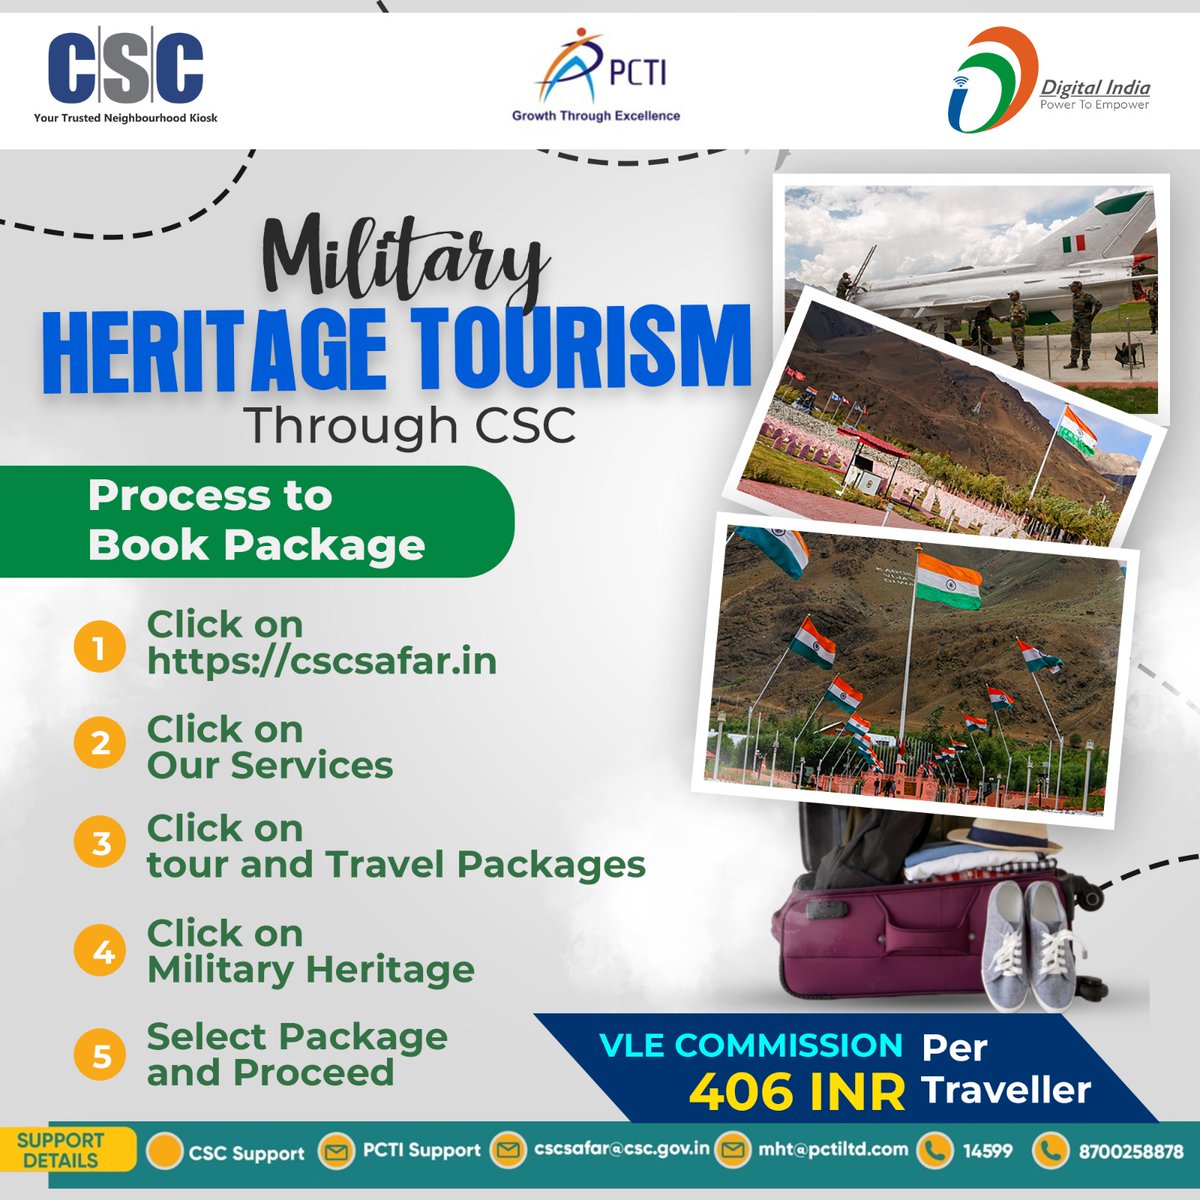 Explore India's rich & largely untapped military heritage legacy through #CSC... Visit cscsafar.in to book a package & earn ₹406 commission per traveler. Contact cscsafar@csc.gov.in for support. #CSCMilitaryHeritageService #MilitaryHeritage #CSCSafar #DigitalIndia